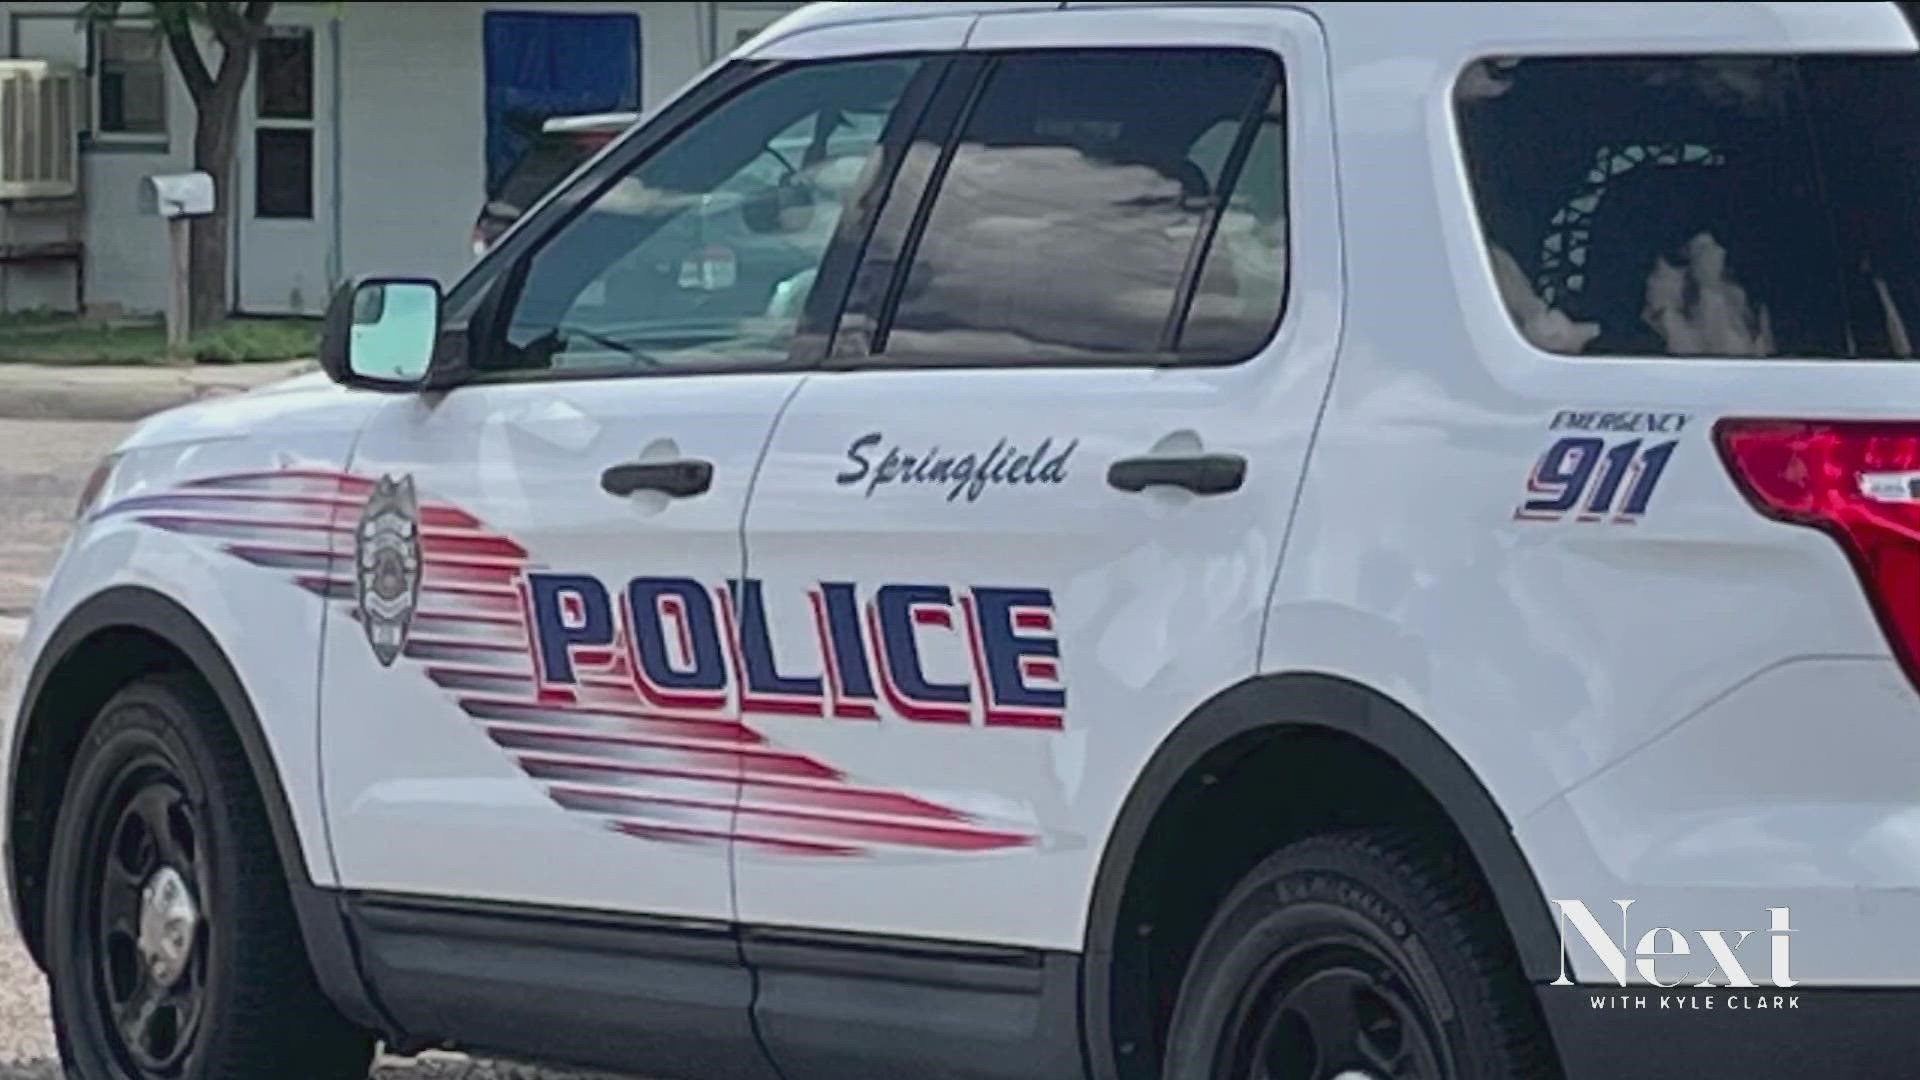 Last week, the final remaining officer in Nederland resigned. A month ago, all three members of the tiny Springfield Police Department called it quits. Why?